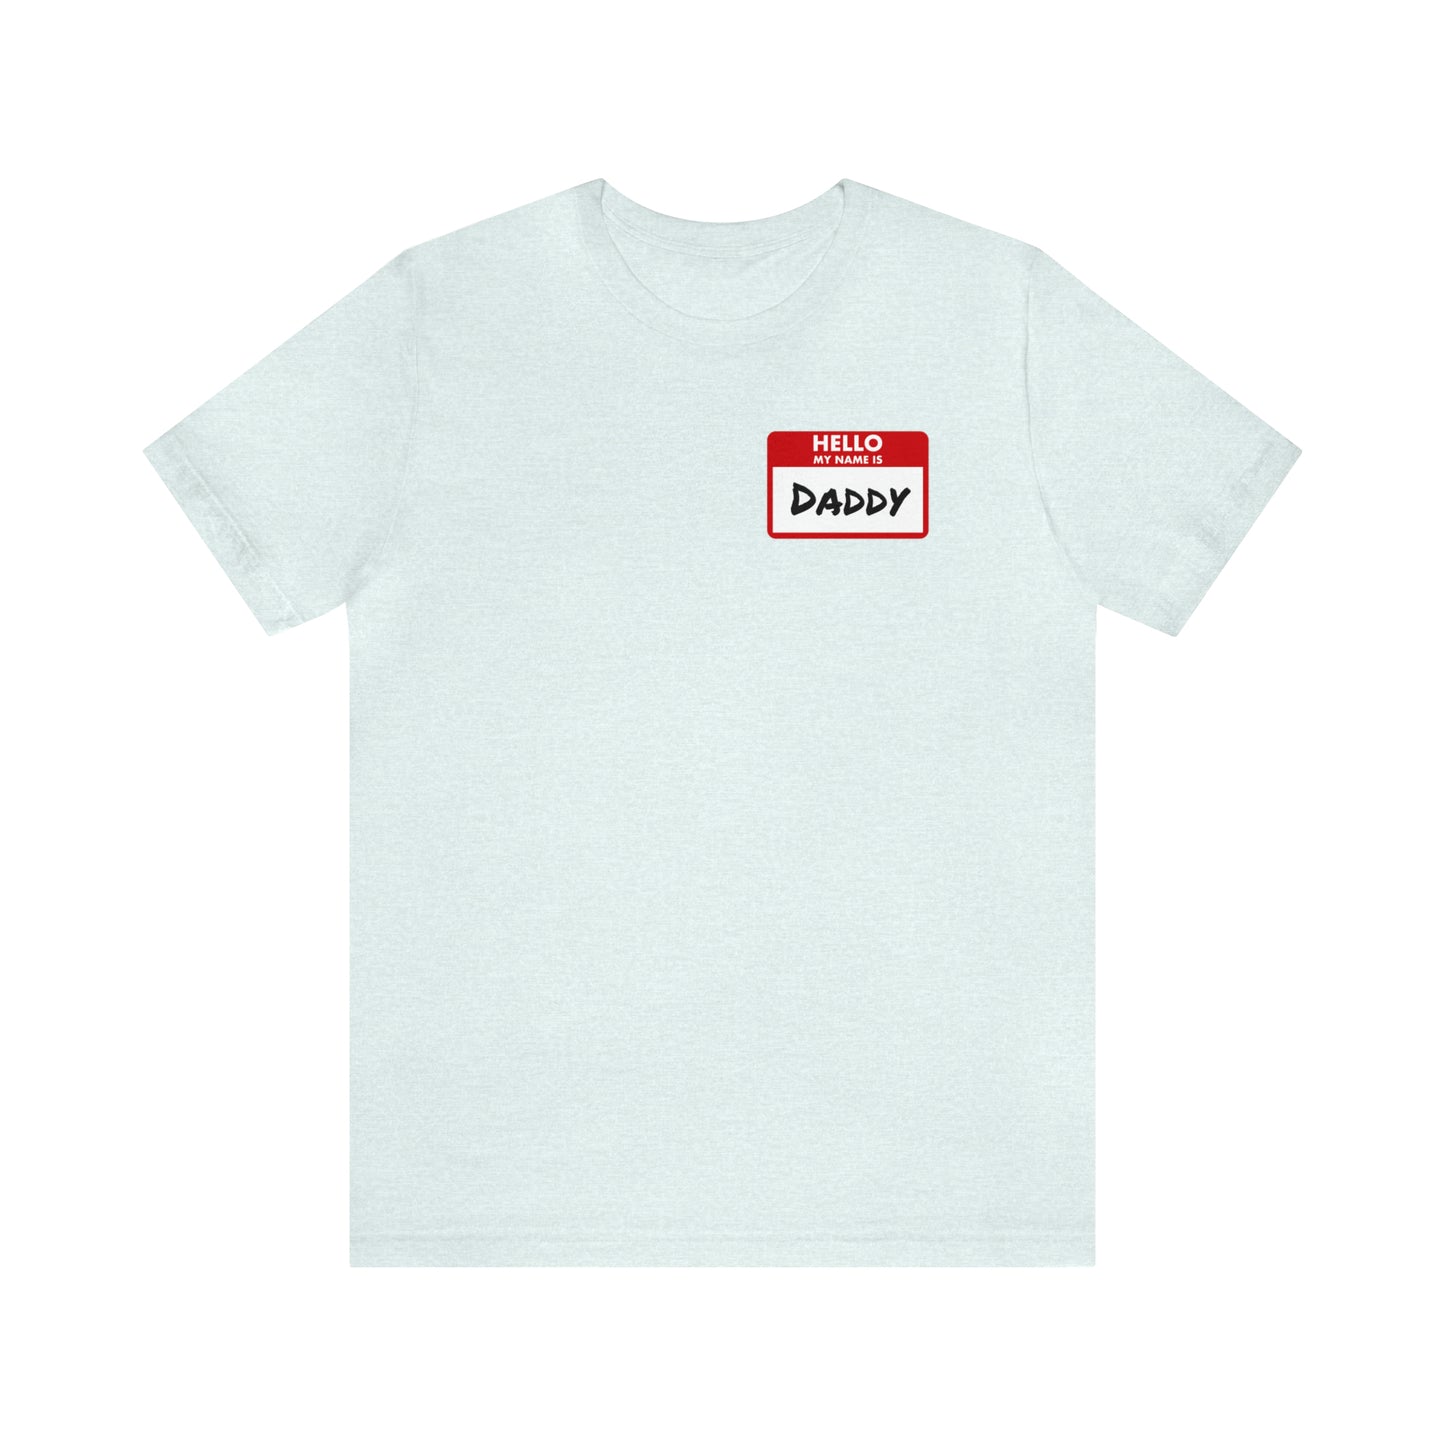 Daddy Name Tag Tee